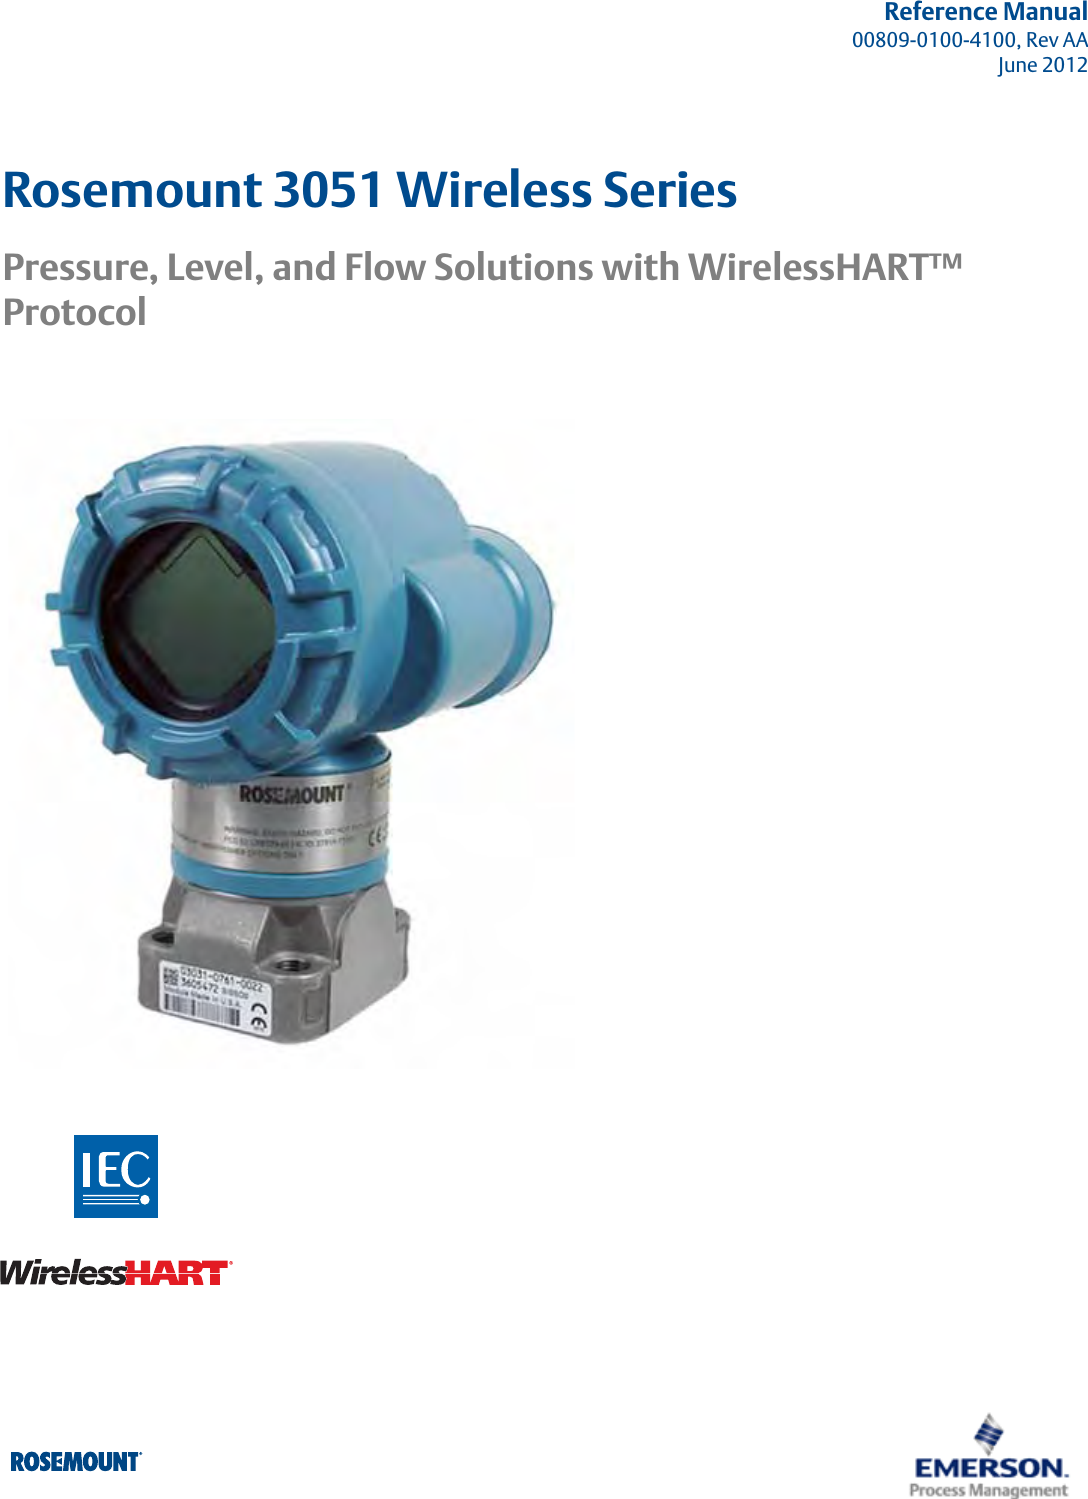 Reference Manual00809-0100-4100, Rev AAJune 2012Rosemount 3051 Wireless Series Pressure, Level, and Flow Solutions with WirelessHART™ Protocol